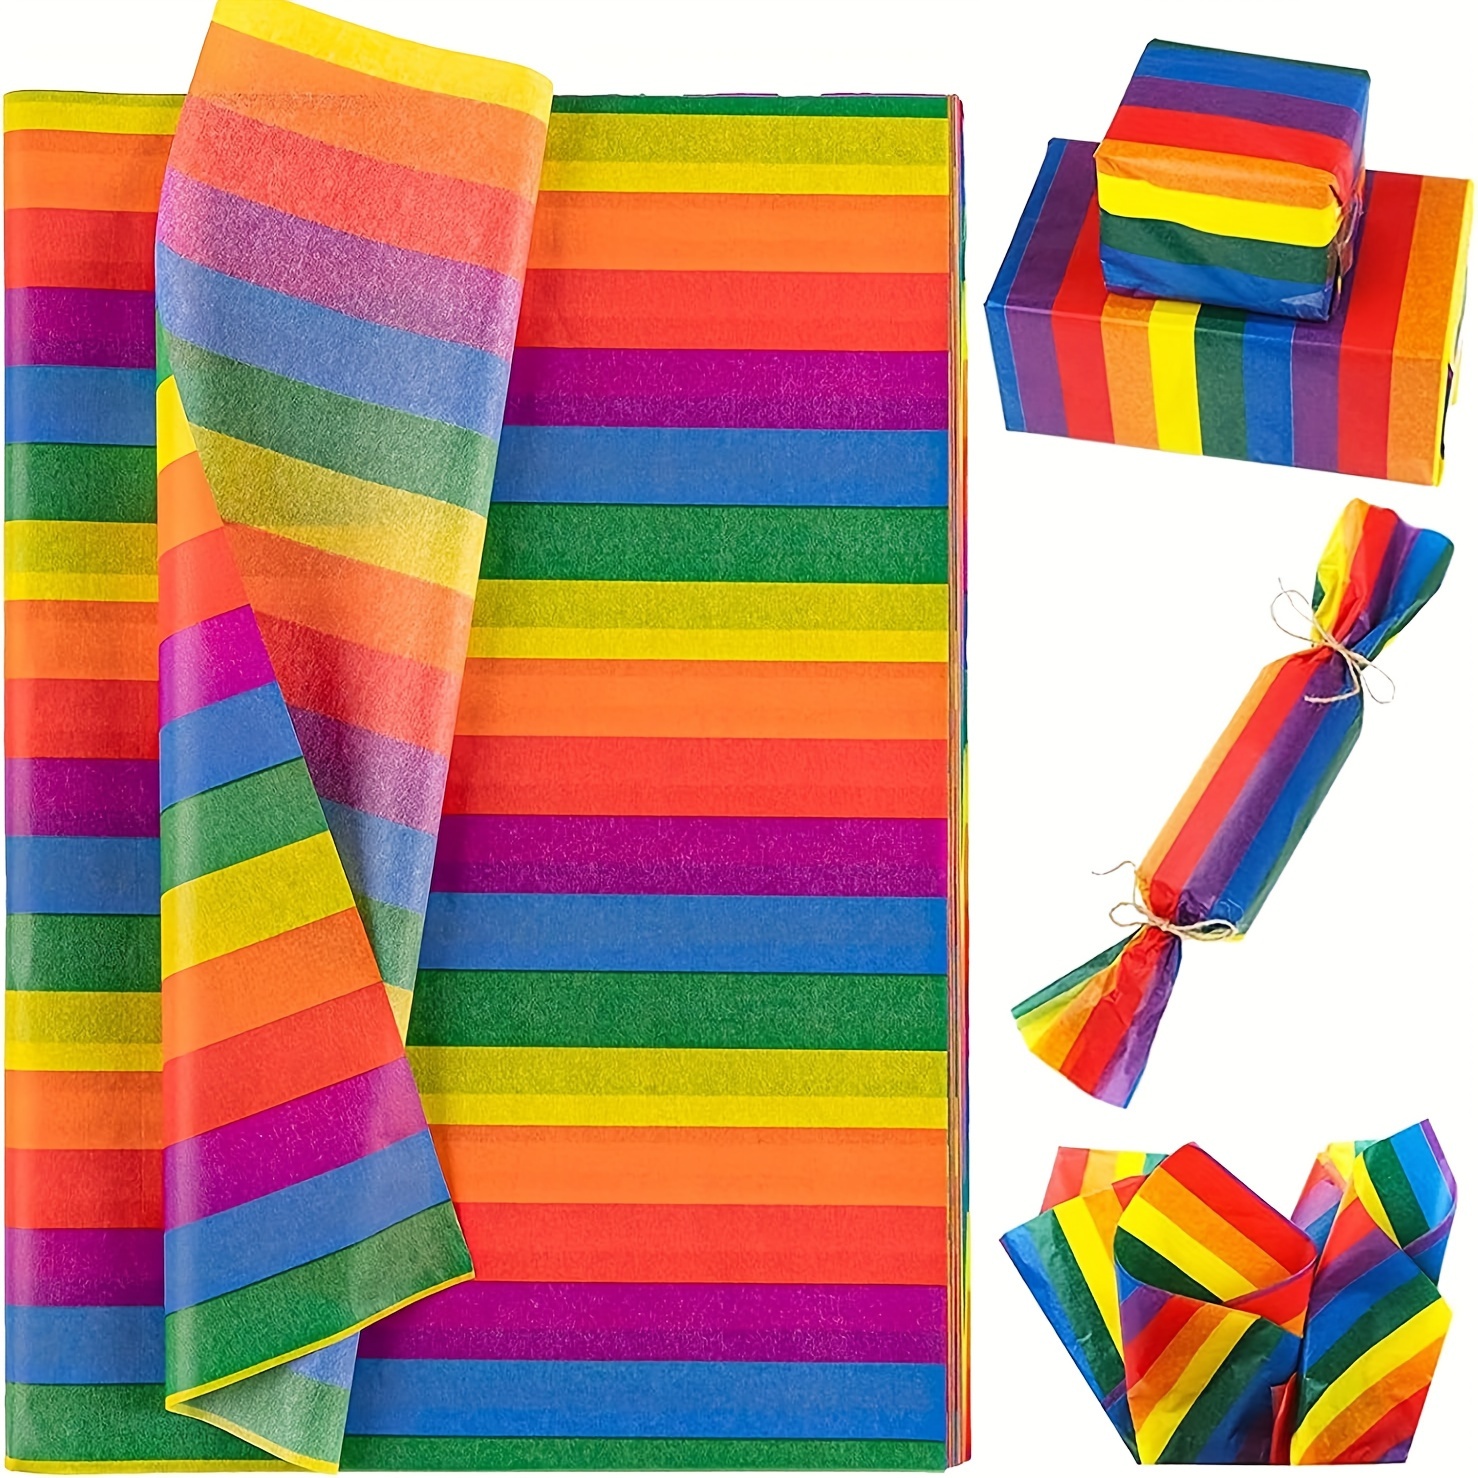 

10sheets Rainbow Tissue Paper Multicolor Stripes Art Tissue Bulk Colored Gift Wrapping Paper For Diy Art Craft Pride Party Bags Birthday Wedding Favors, 14x20 Inch